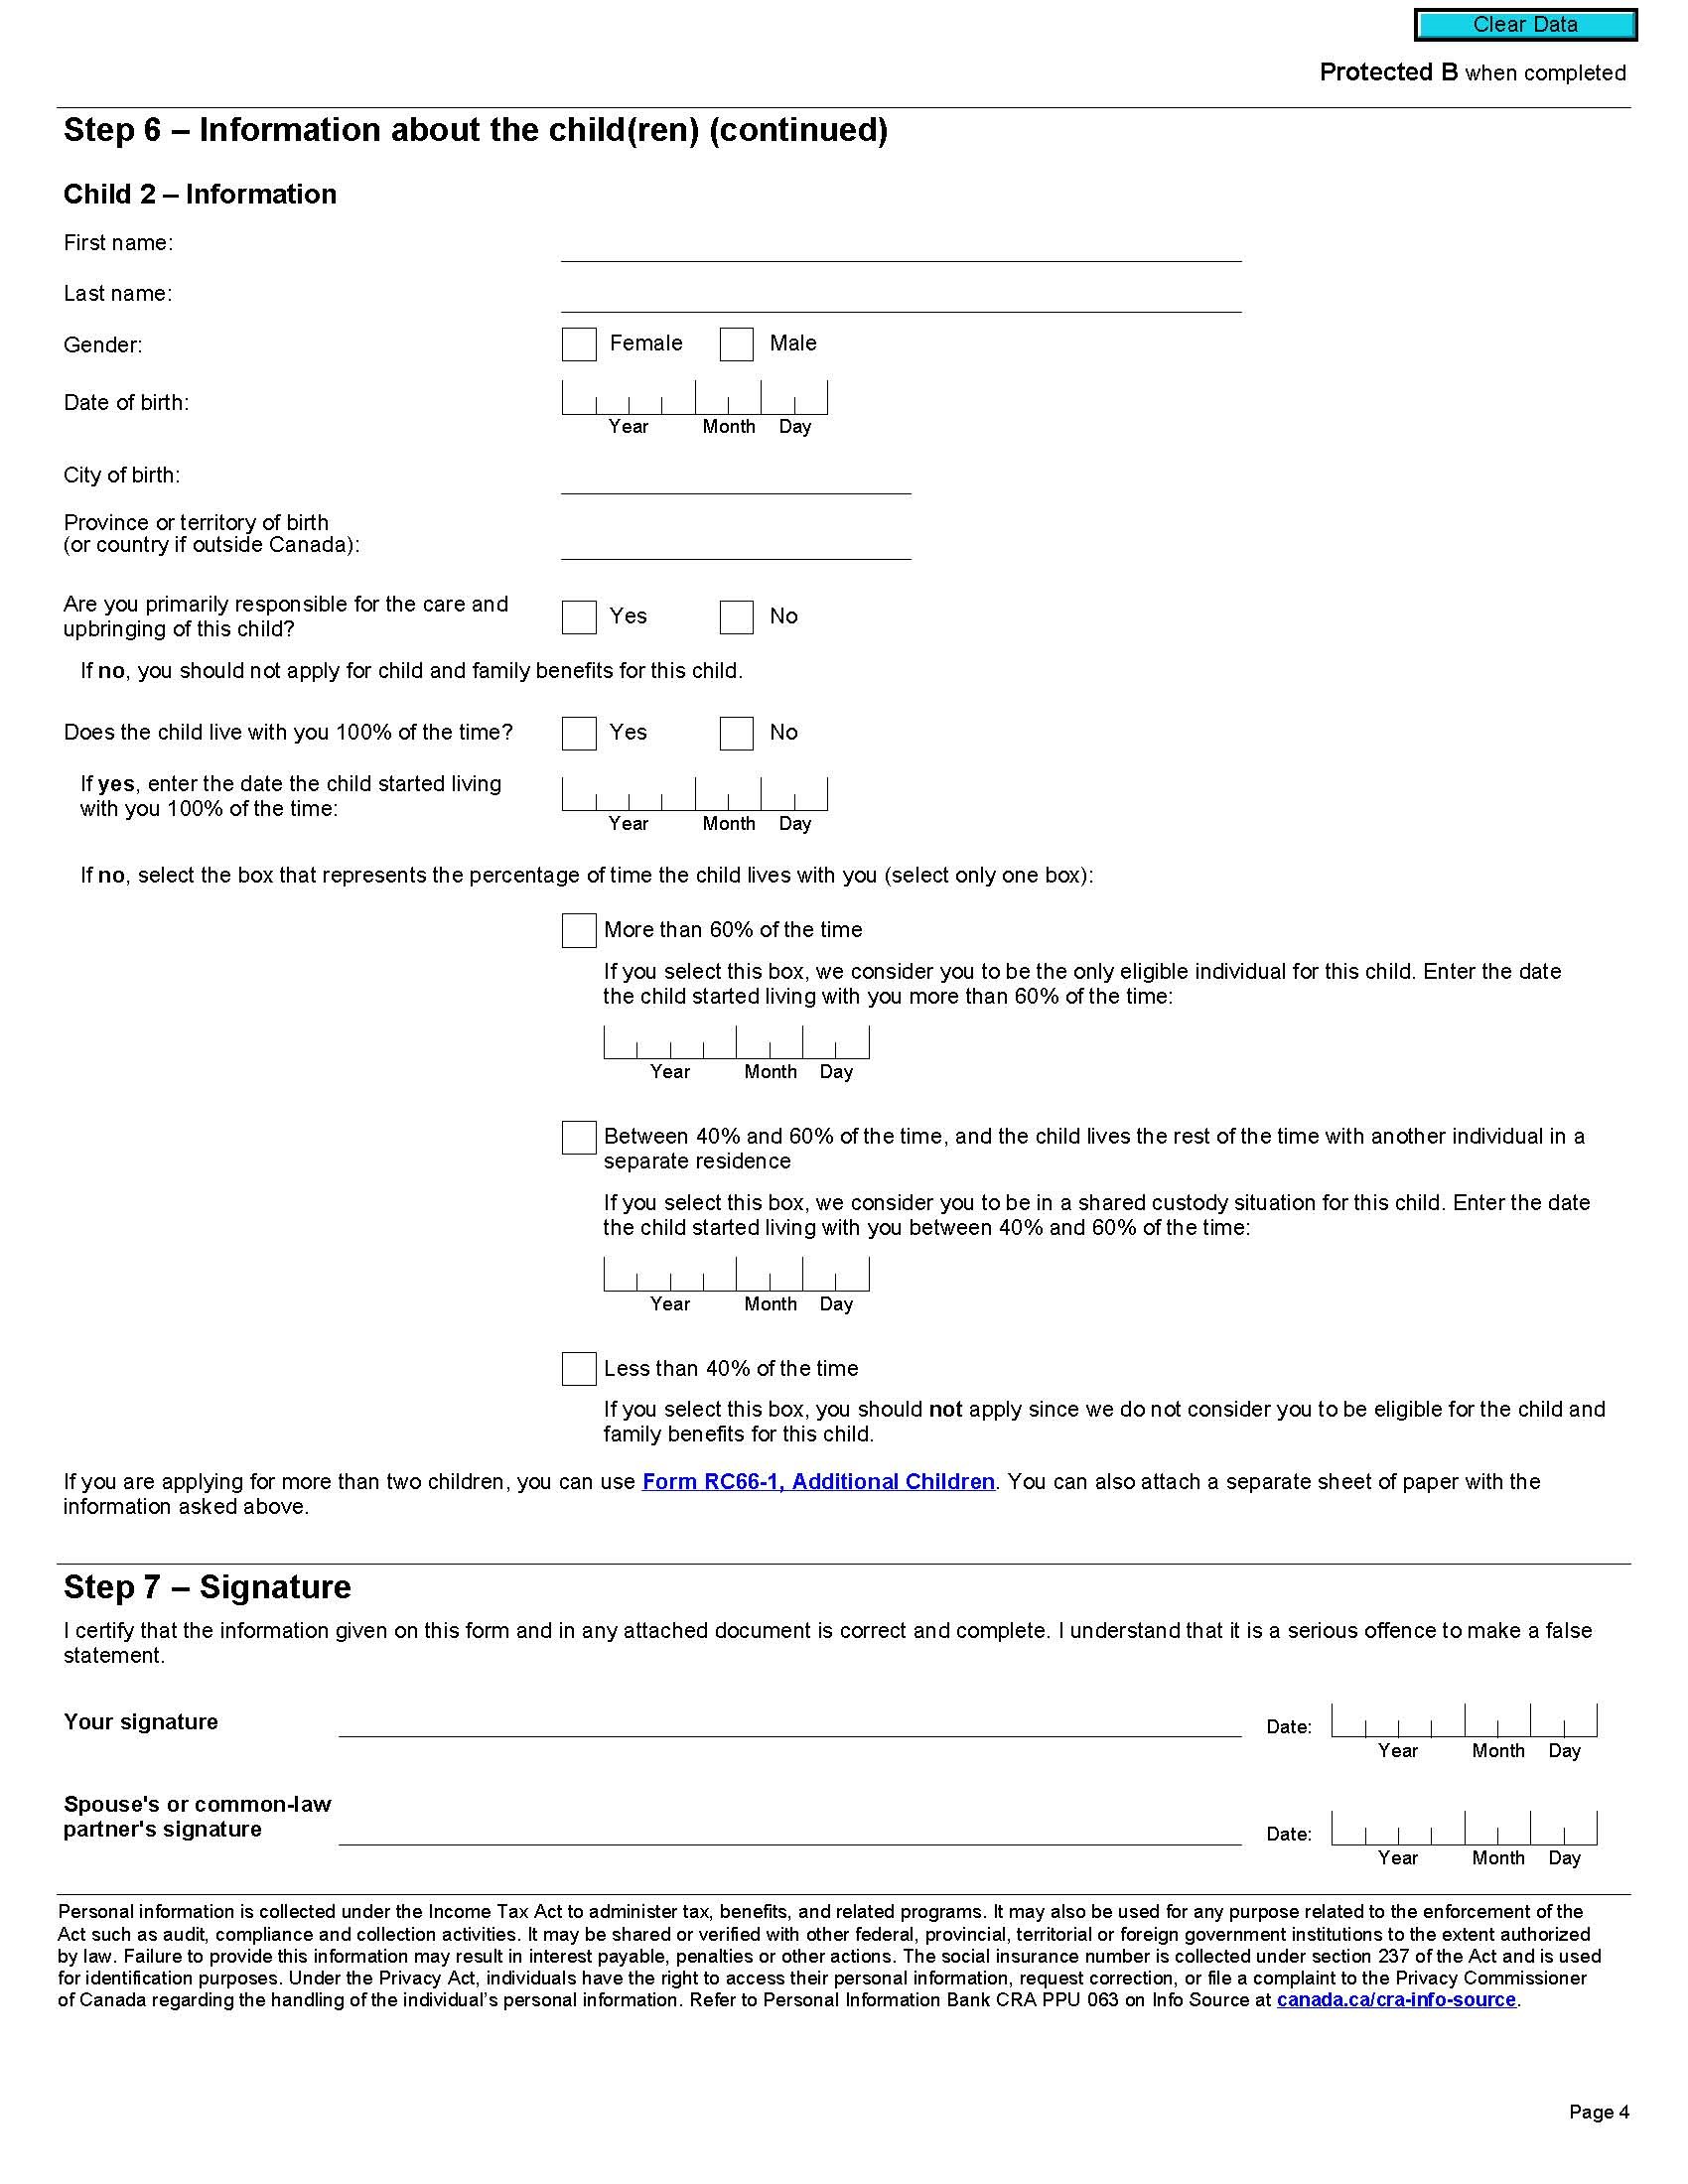 page 4 of Canada Child Benefit Application Form (RC66)